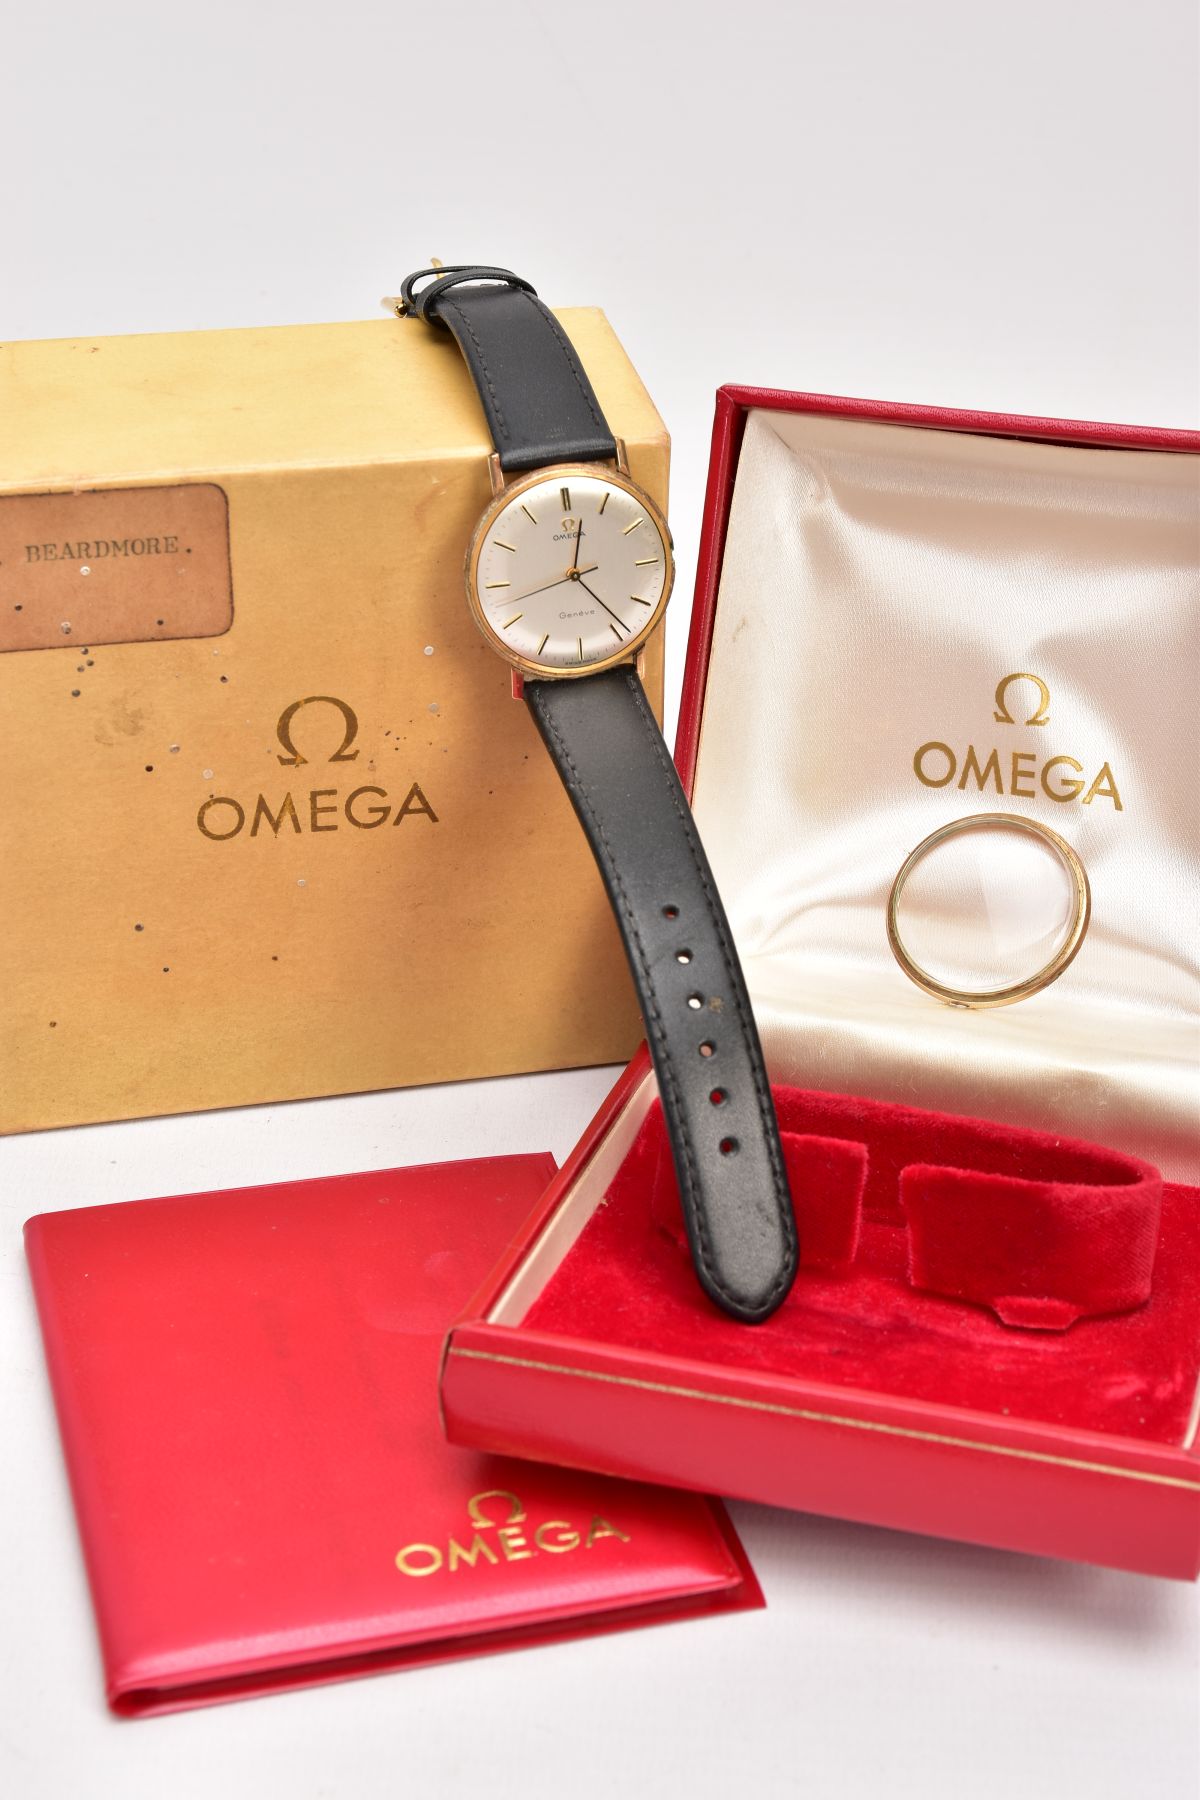 A GENTS 9CT GOLD 'OMEGA GENEVE' WRISTWATCH, (missing crown) round silver dial signed 'Omega Geneve', - Image 6 of 6